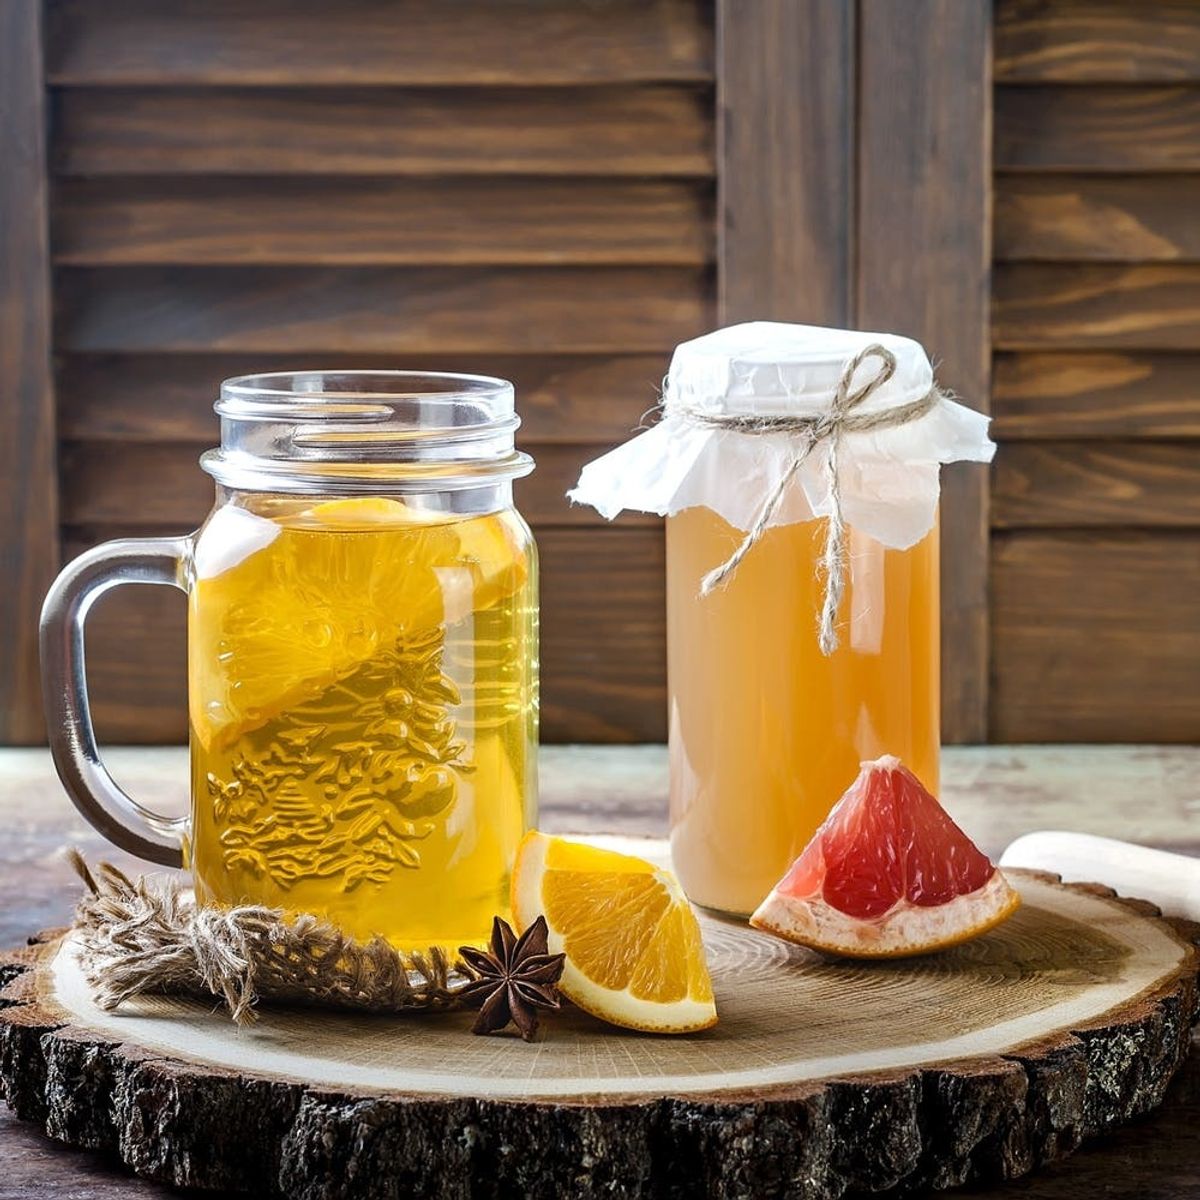 5 Things You Need to Know Before Drinking Kombucha for Your Health